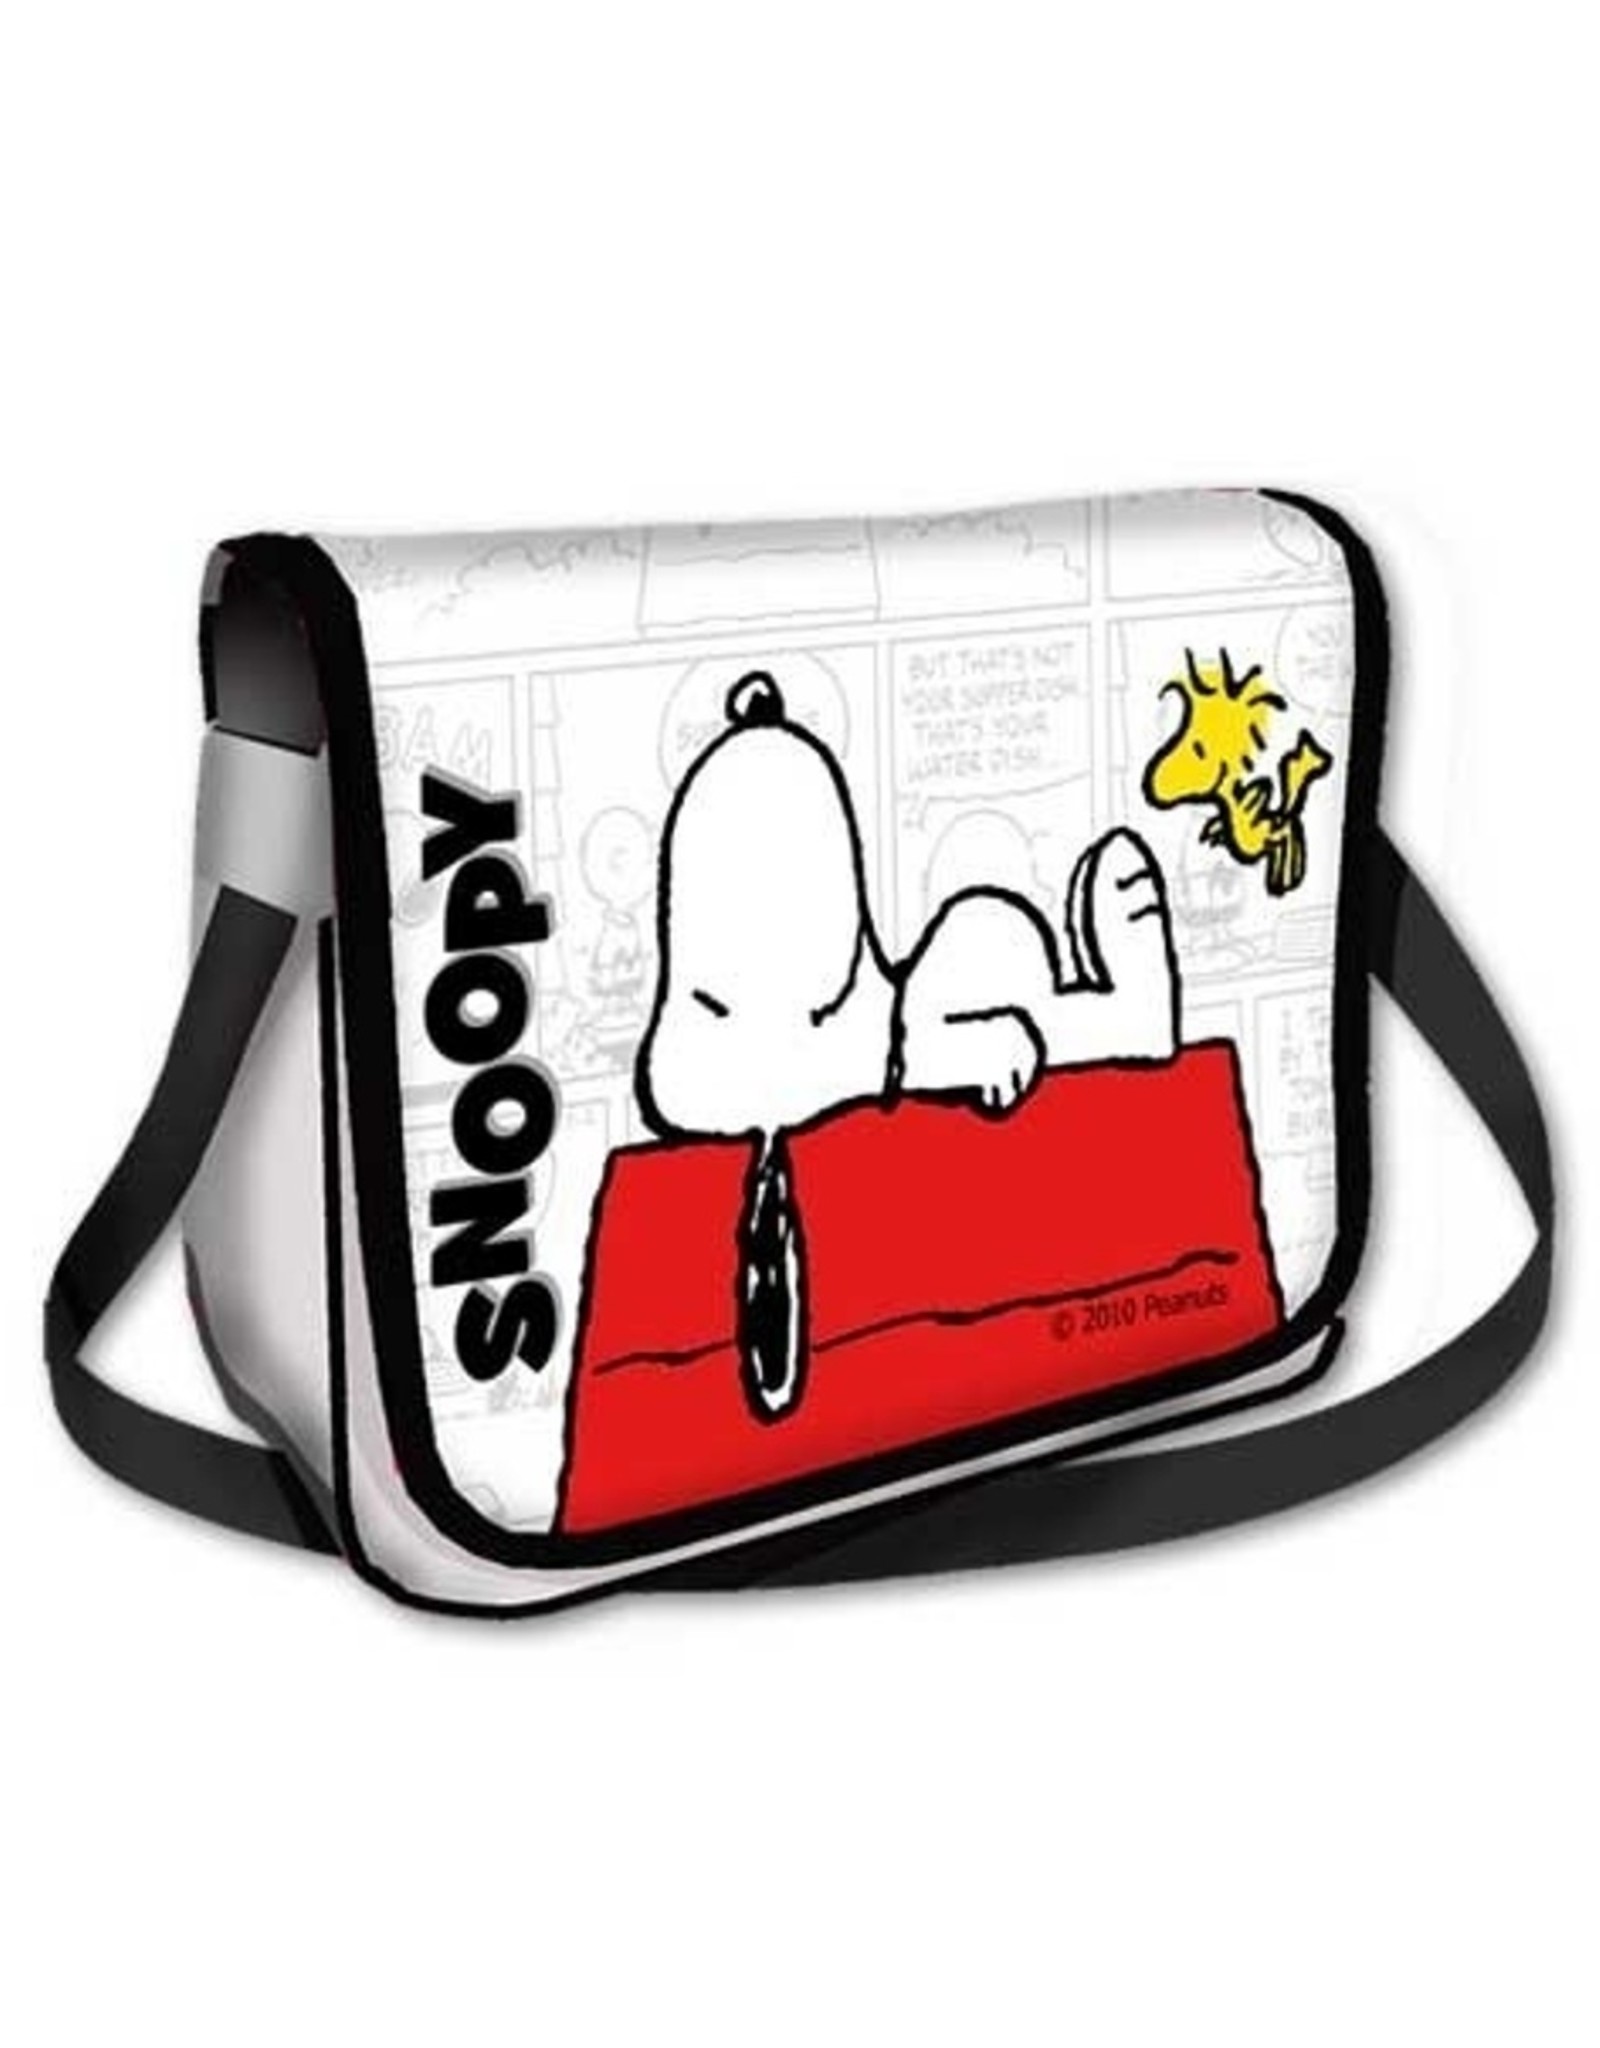 Snoopy Snoopy bags - Snoopy Live shoulder bag